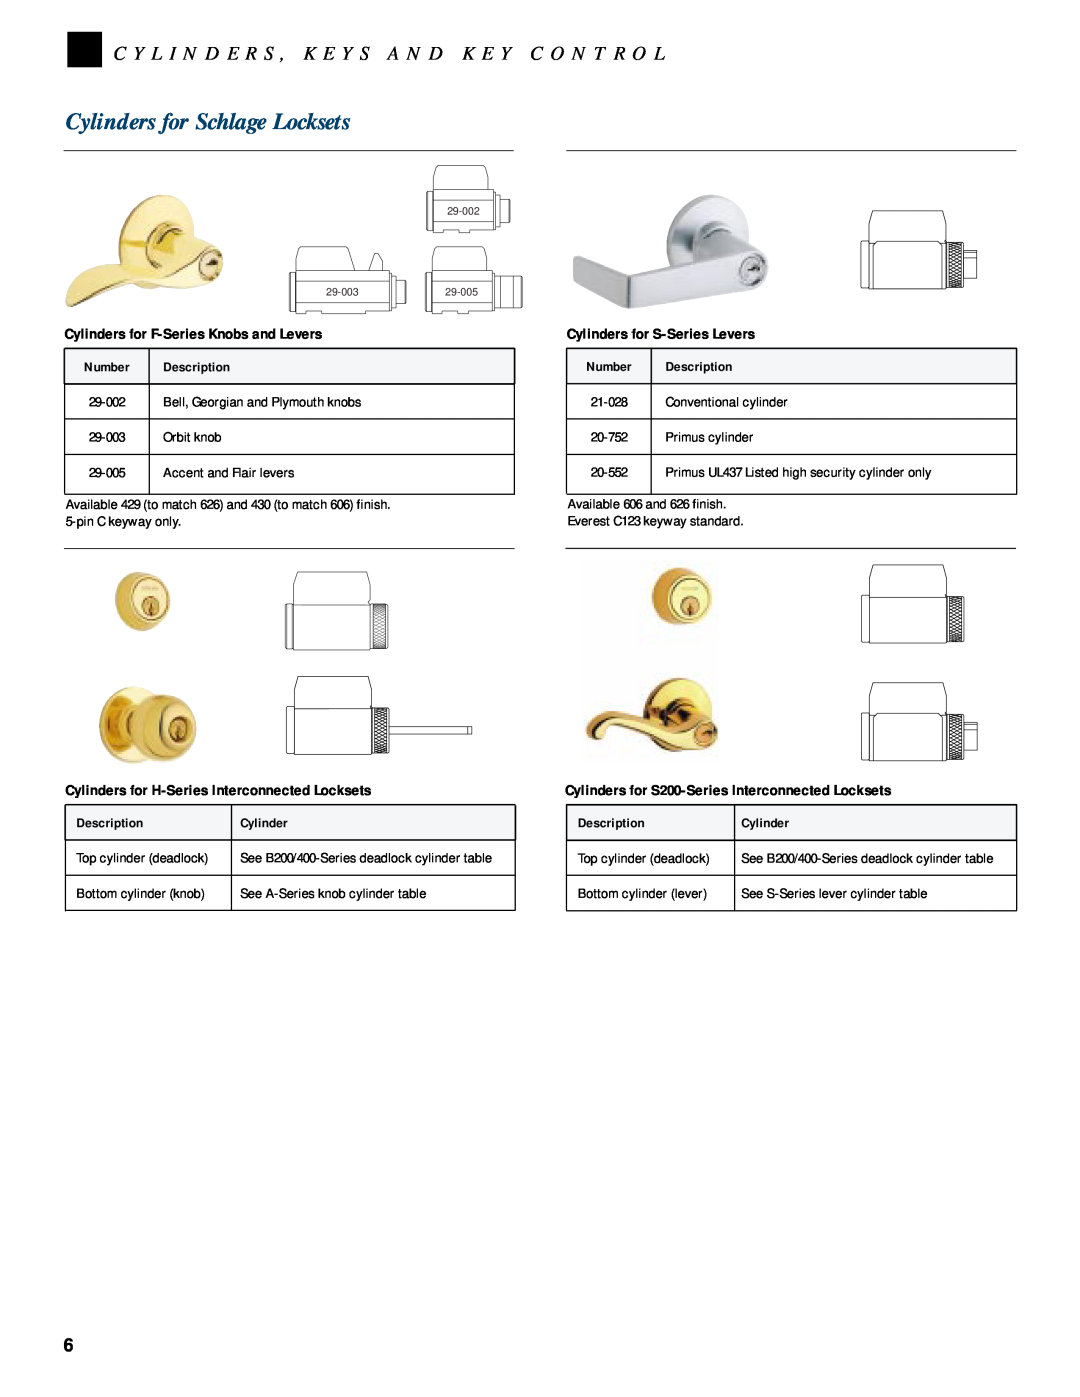 Schlage CYLINDERS, KEYS AND KEY CONTROL manual Cylinders for Schlage Locksets, Cylinders for F-SeriesKnobs and Levers 